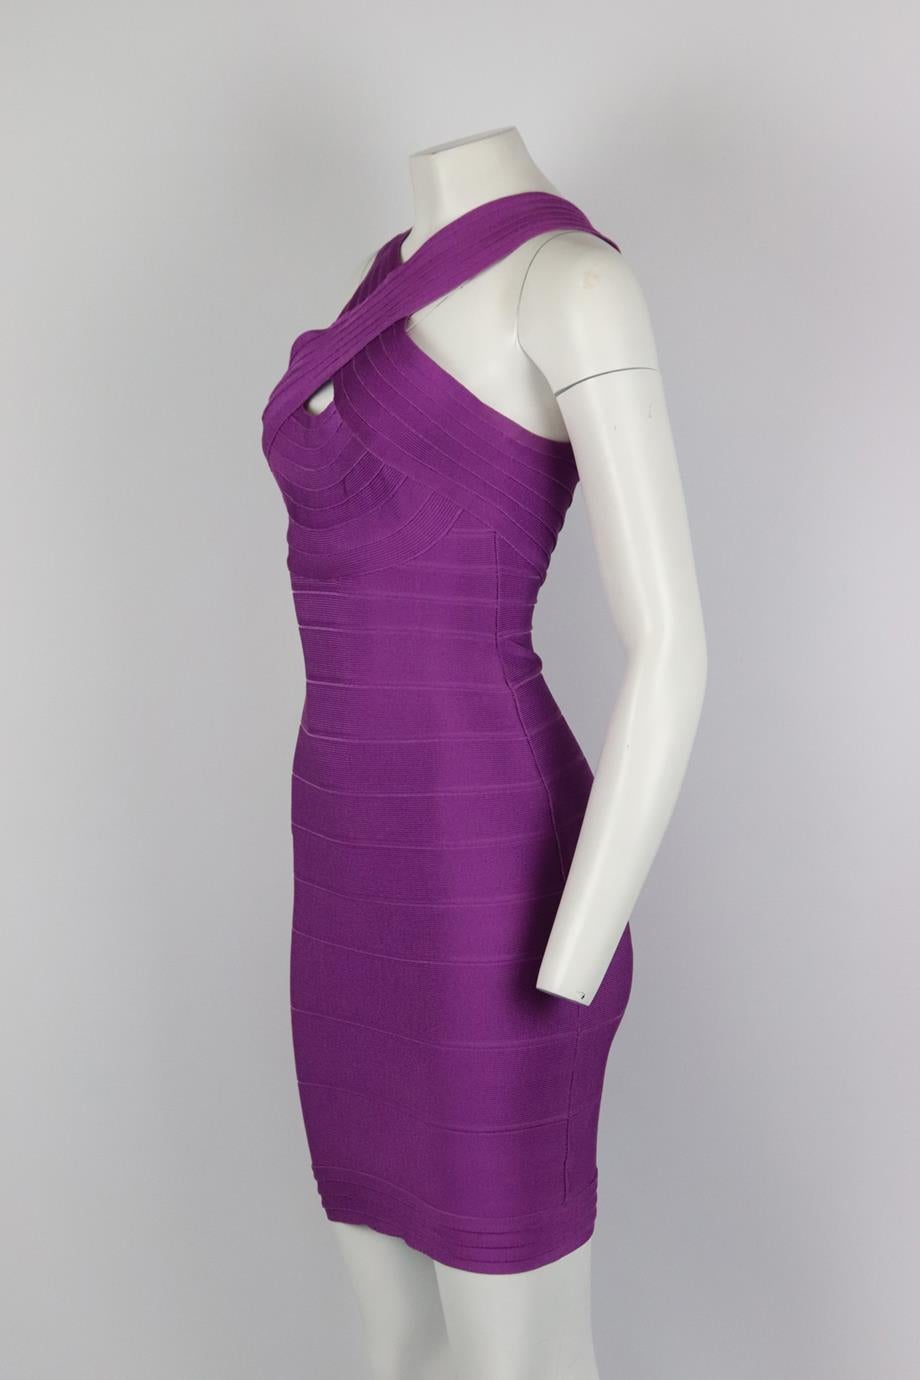 Herve Leger cutout bandage mini dress. Purple. Sleeveless, v-neck. Zip fastening at back. 90% Rayon, 9% nylon, 1% elastane. Size: Small (UK 8, US 4, FR 36, IT 40). Bust: 30 in. Waist: 22 in. Hips: 29.5 in. Length: 35.5 in. Good condition - Few marks